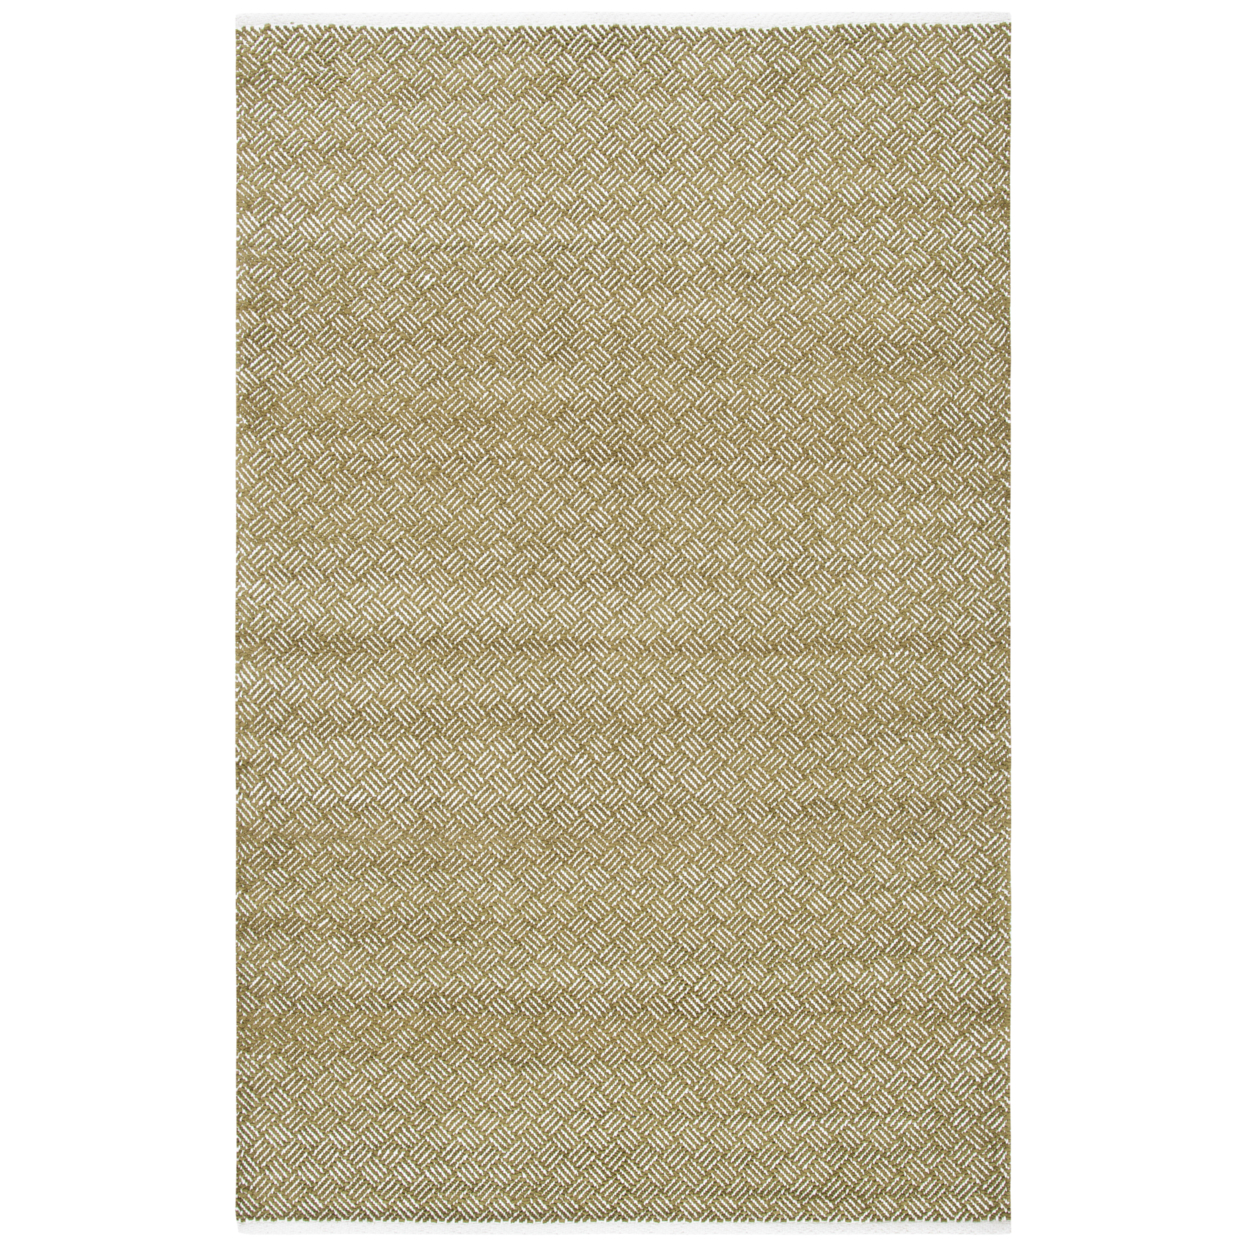 SAFAVIEH Boston Collection BOS680B Handwoven Olive Rug - 5' X 8'